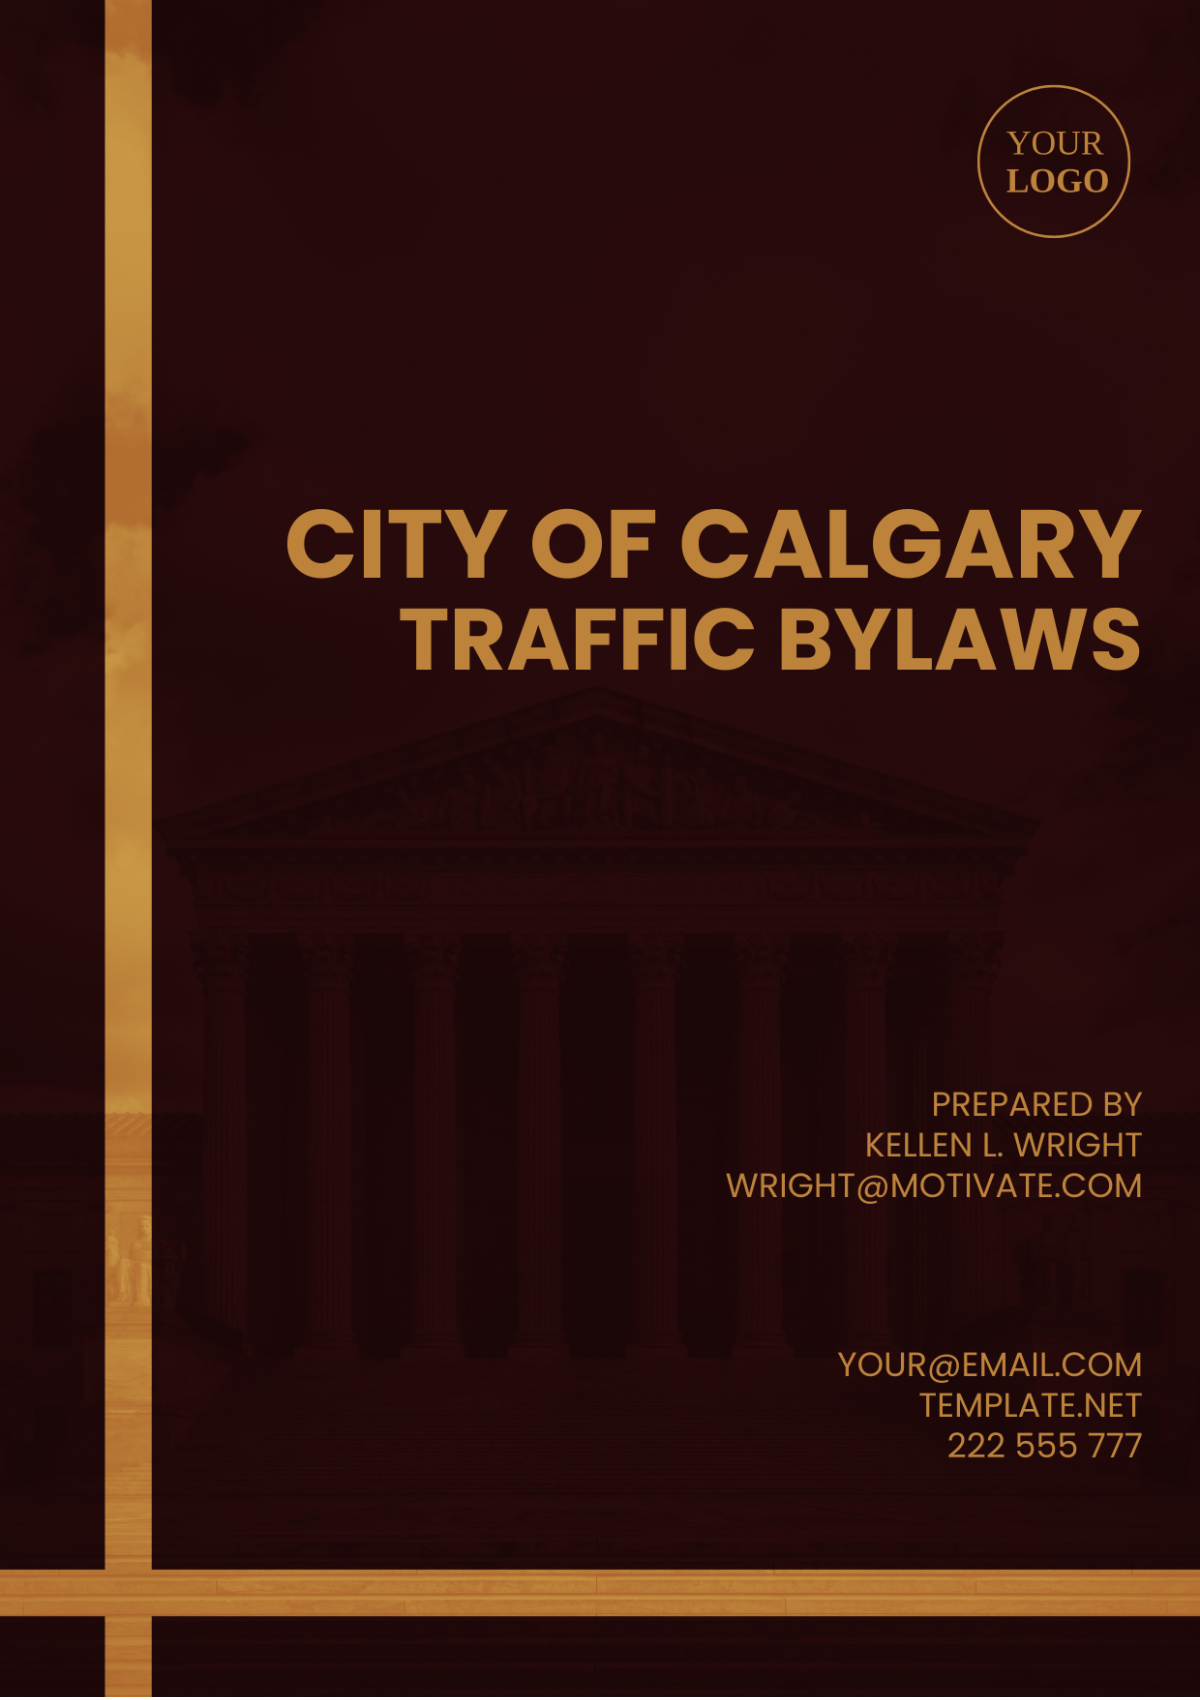 City Of Calgary Traffic Bylaws Template